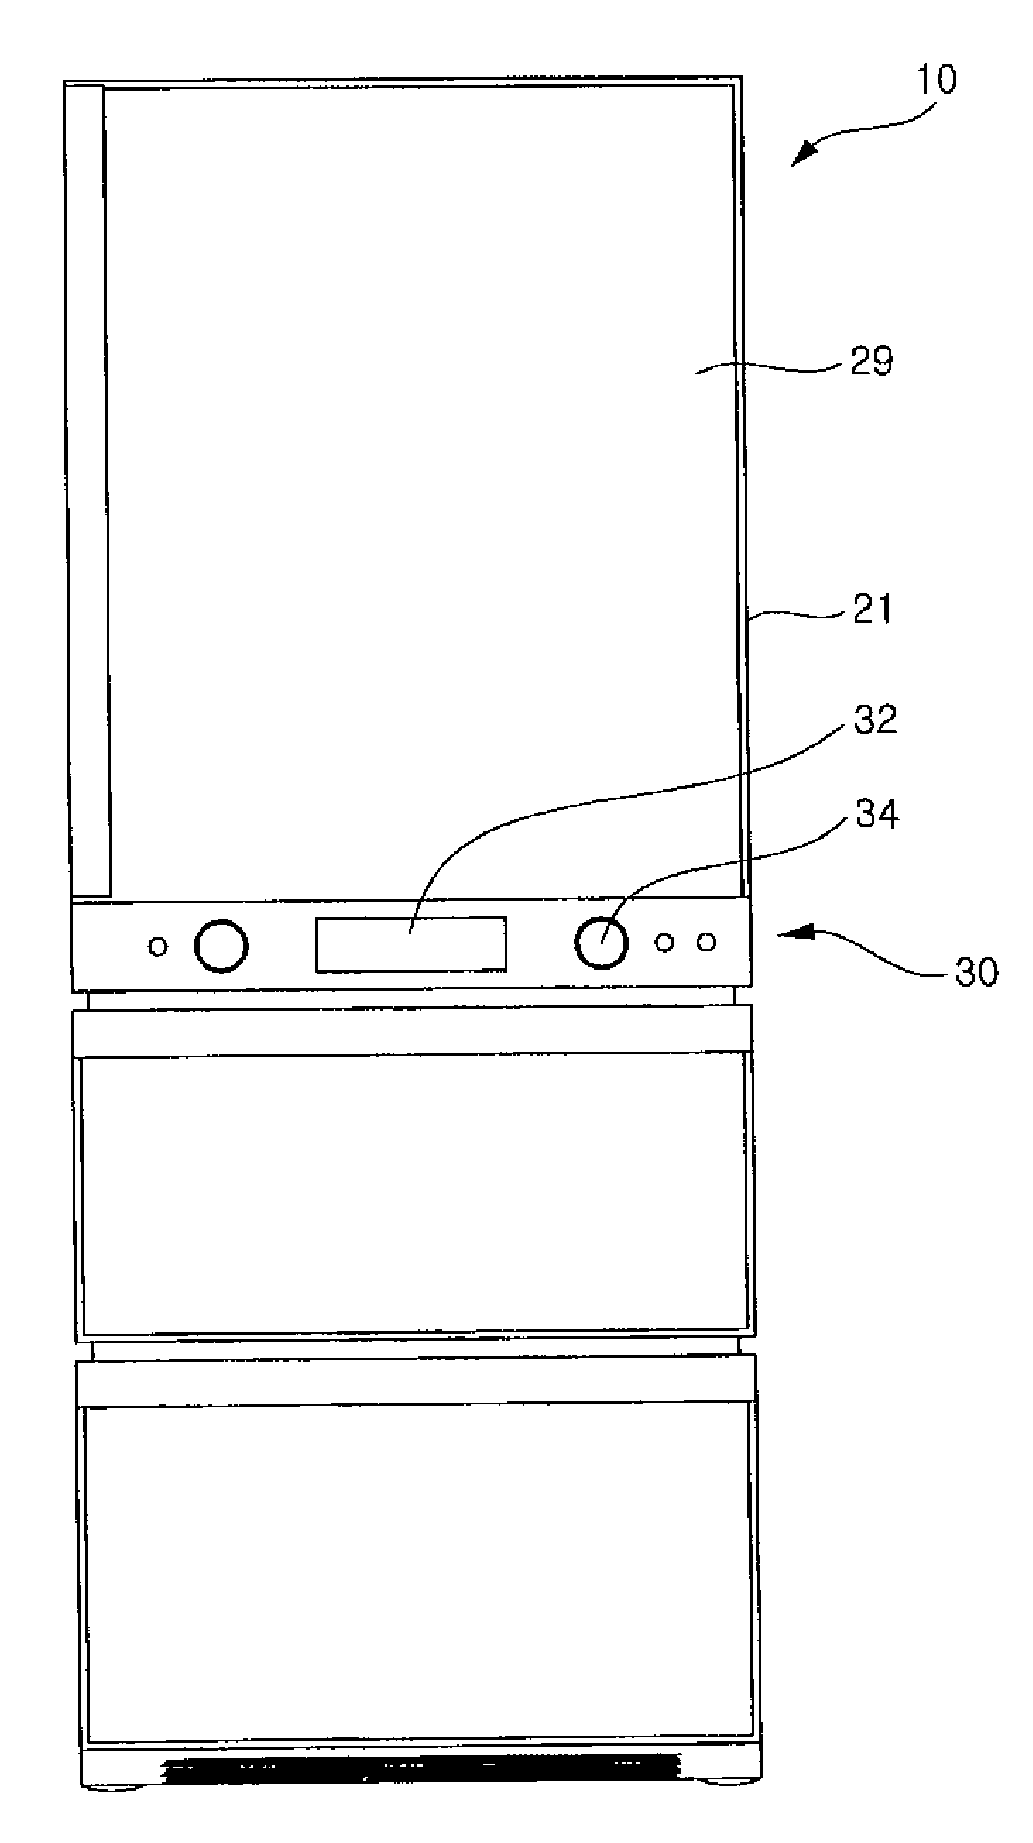 Refrigerator Door and Method of Manufacture Thereof